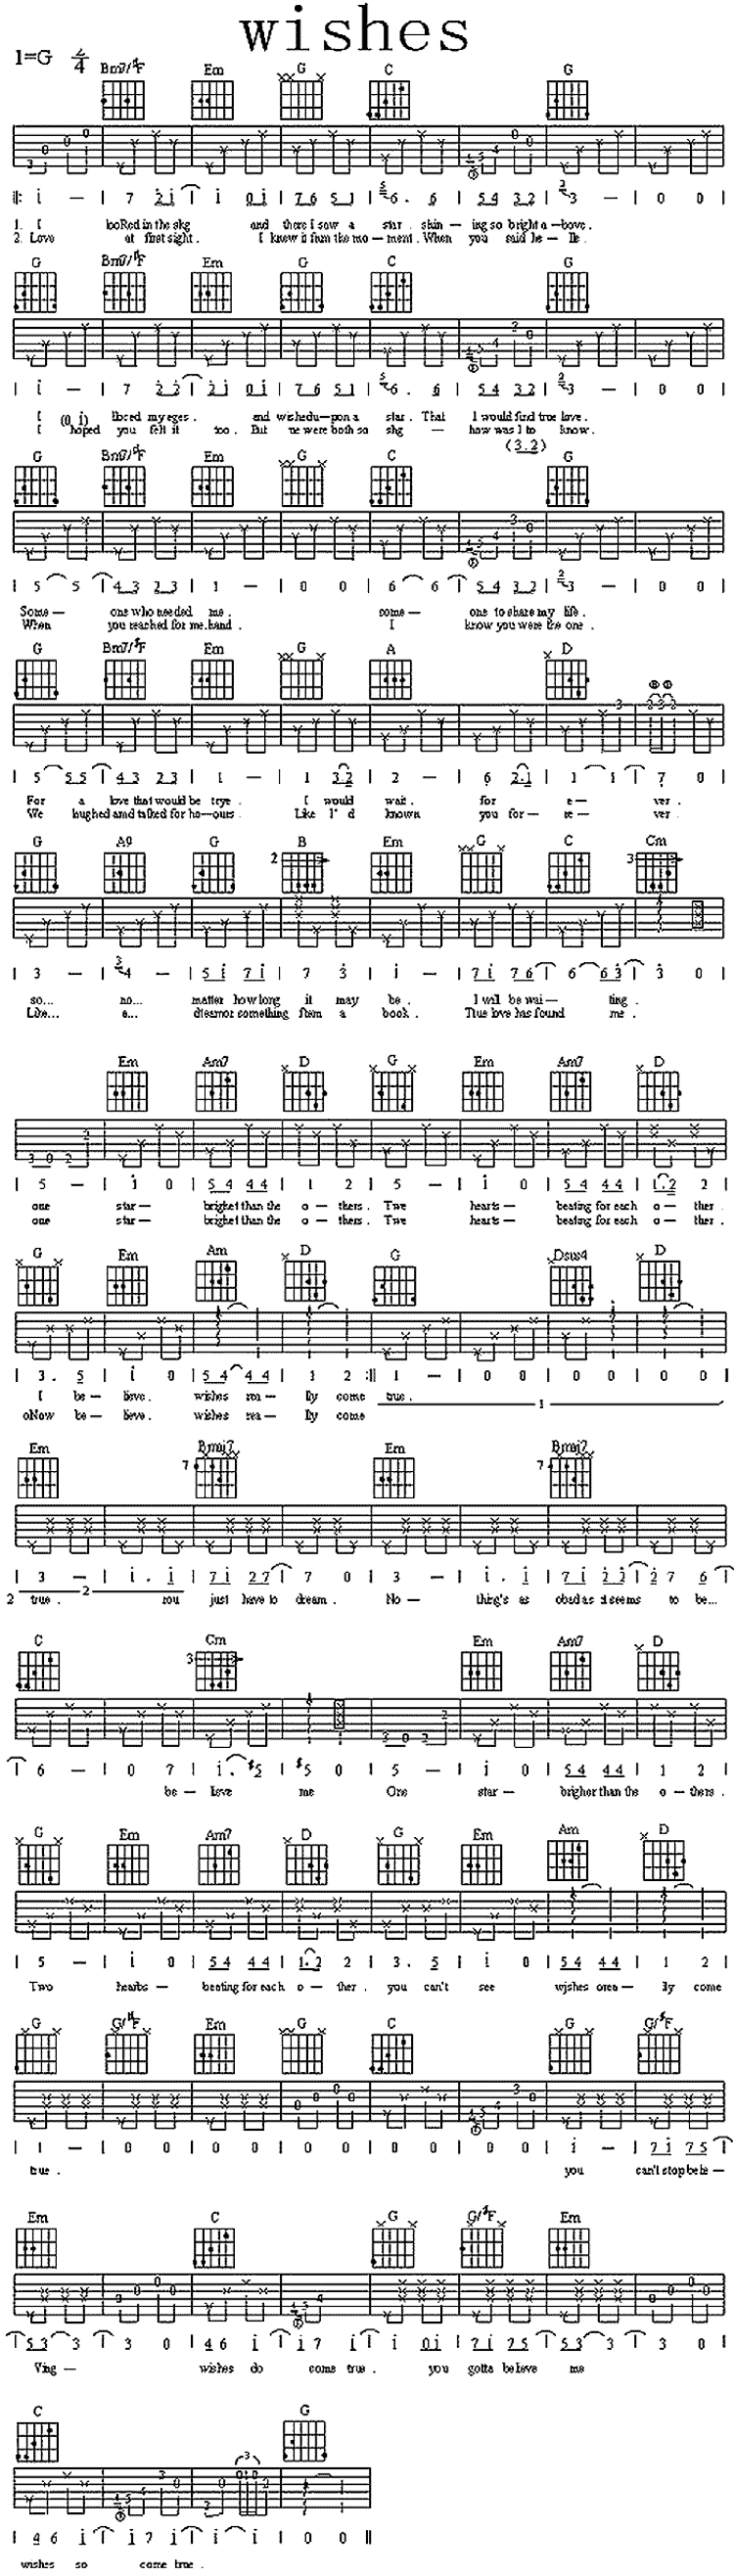 Wishes by Exile Guitar Sheet Music Free